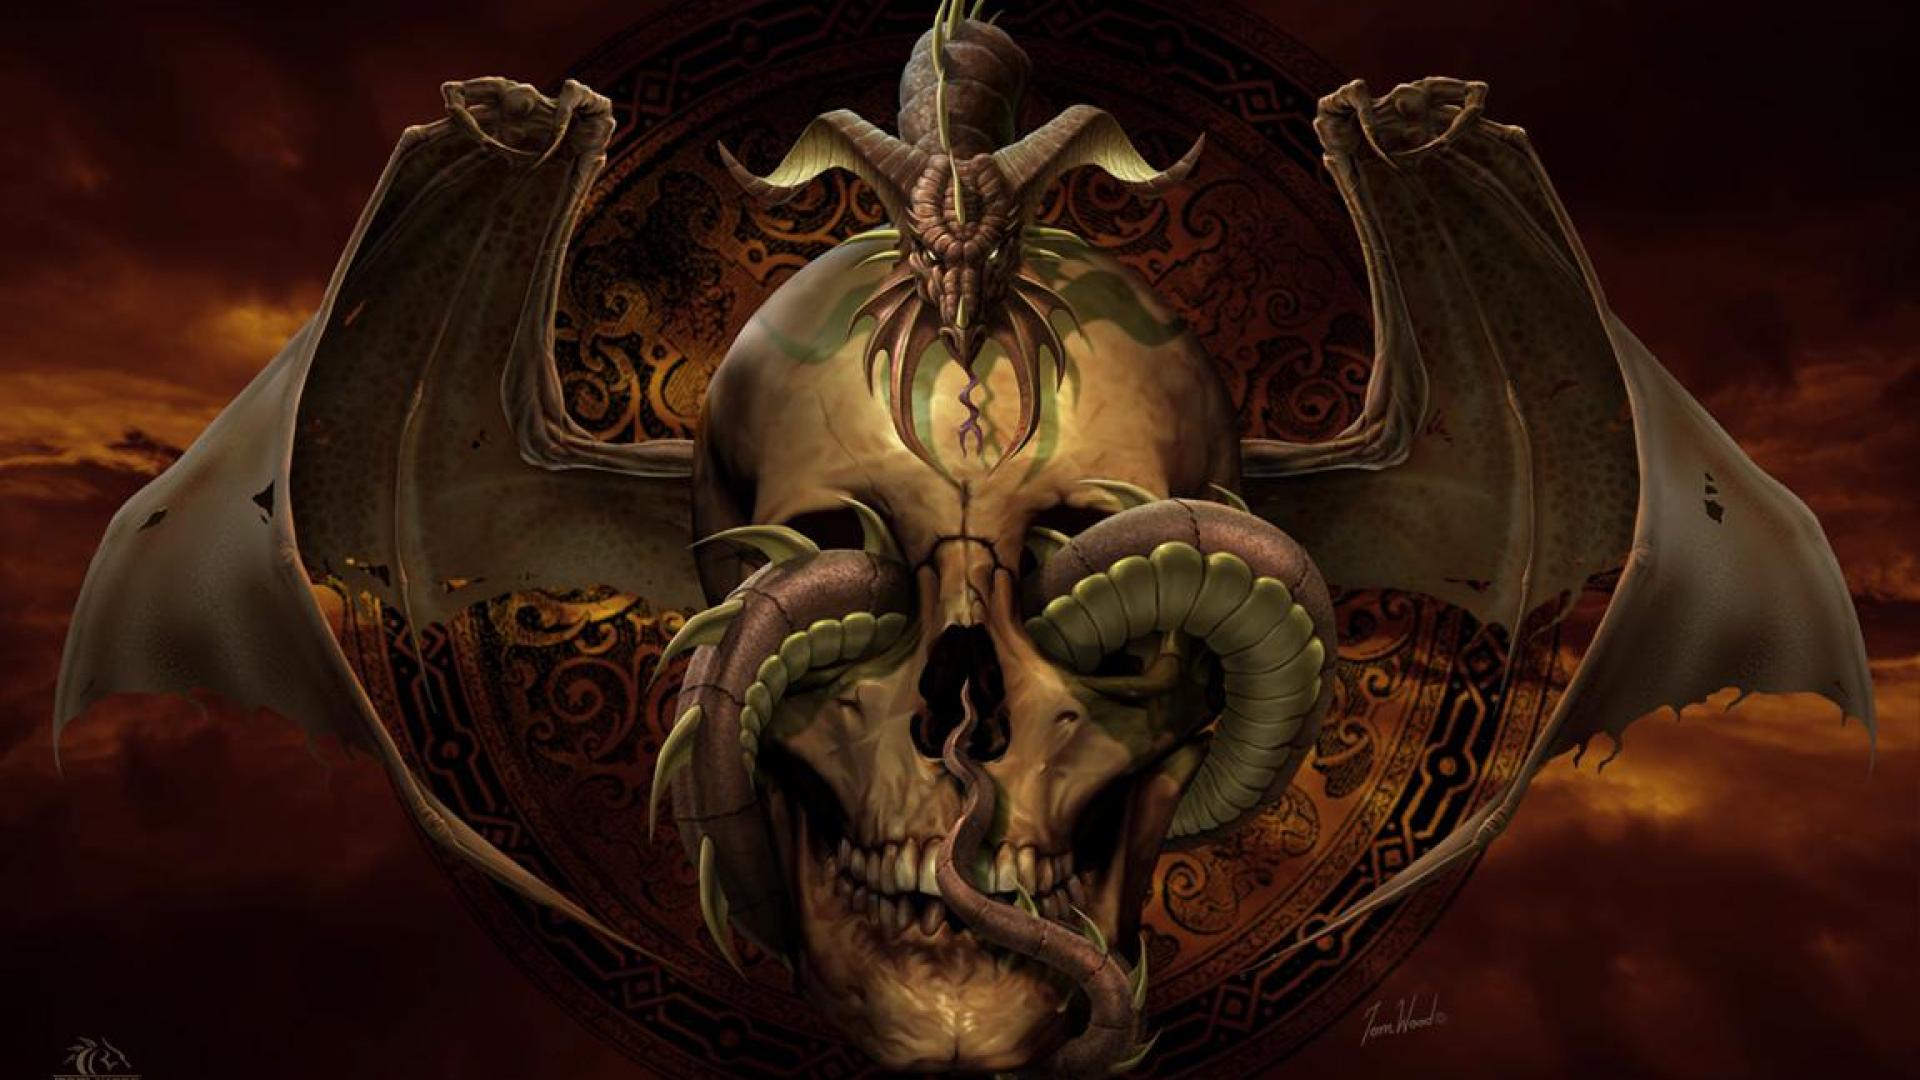 Dragon and skull - - High Quality and Resolution